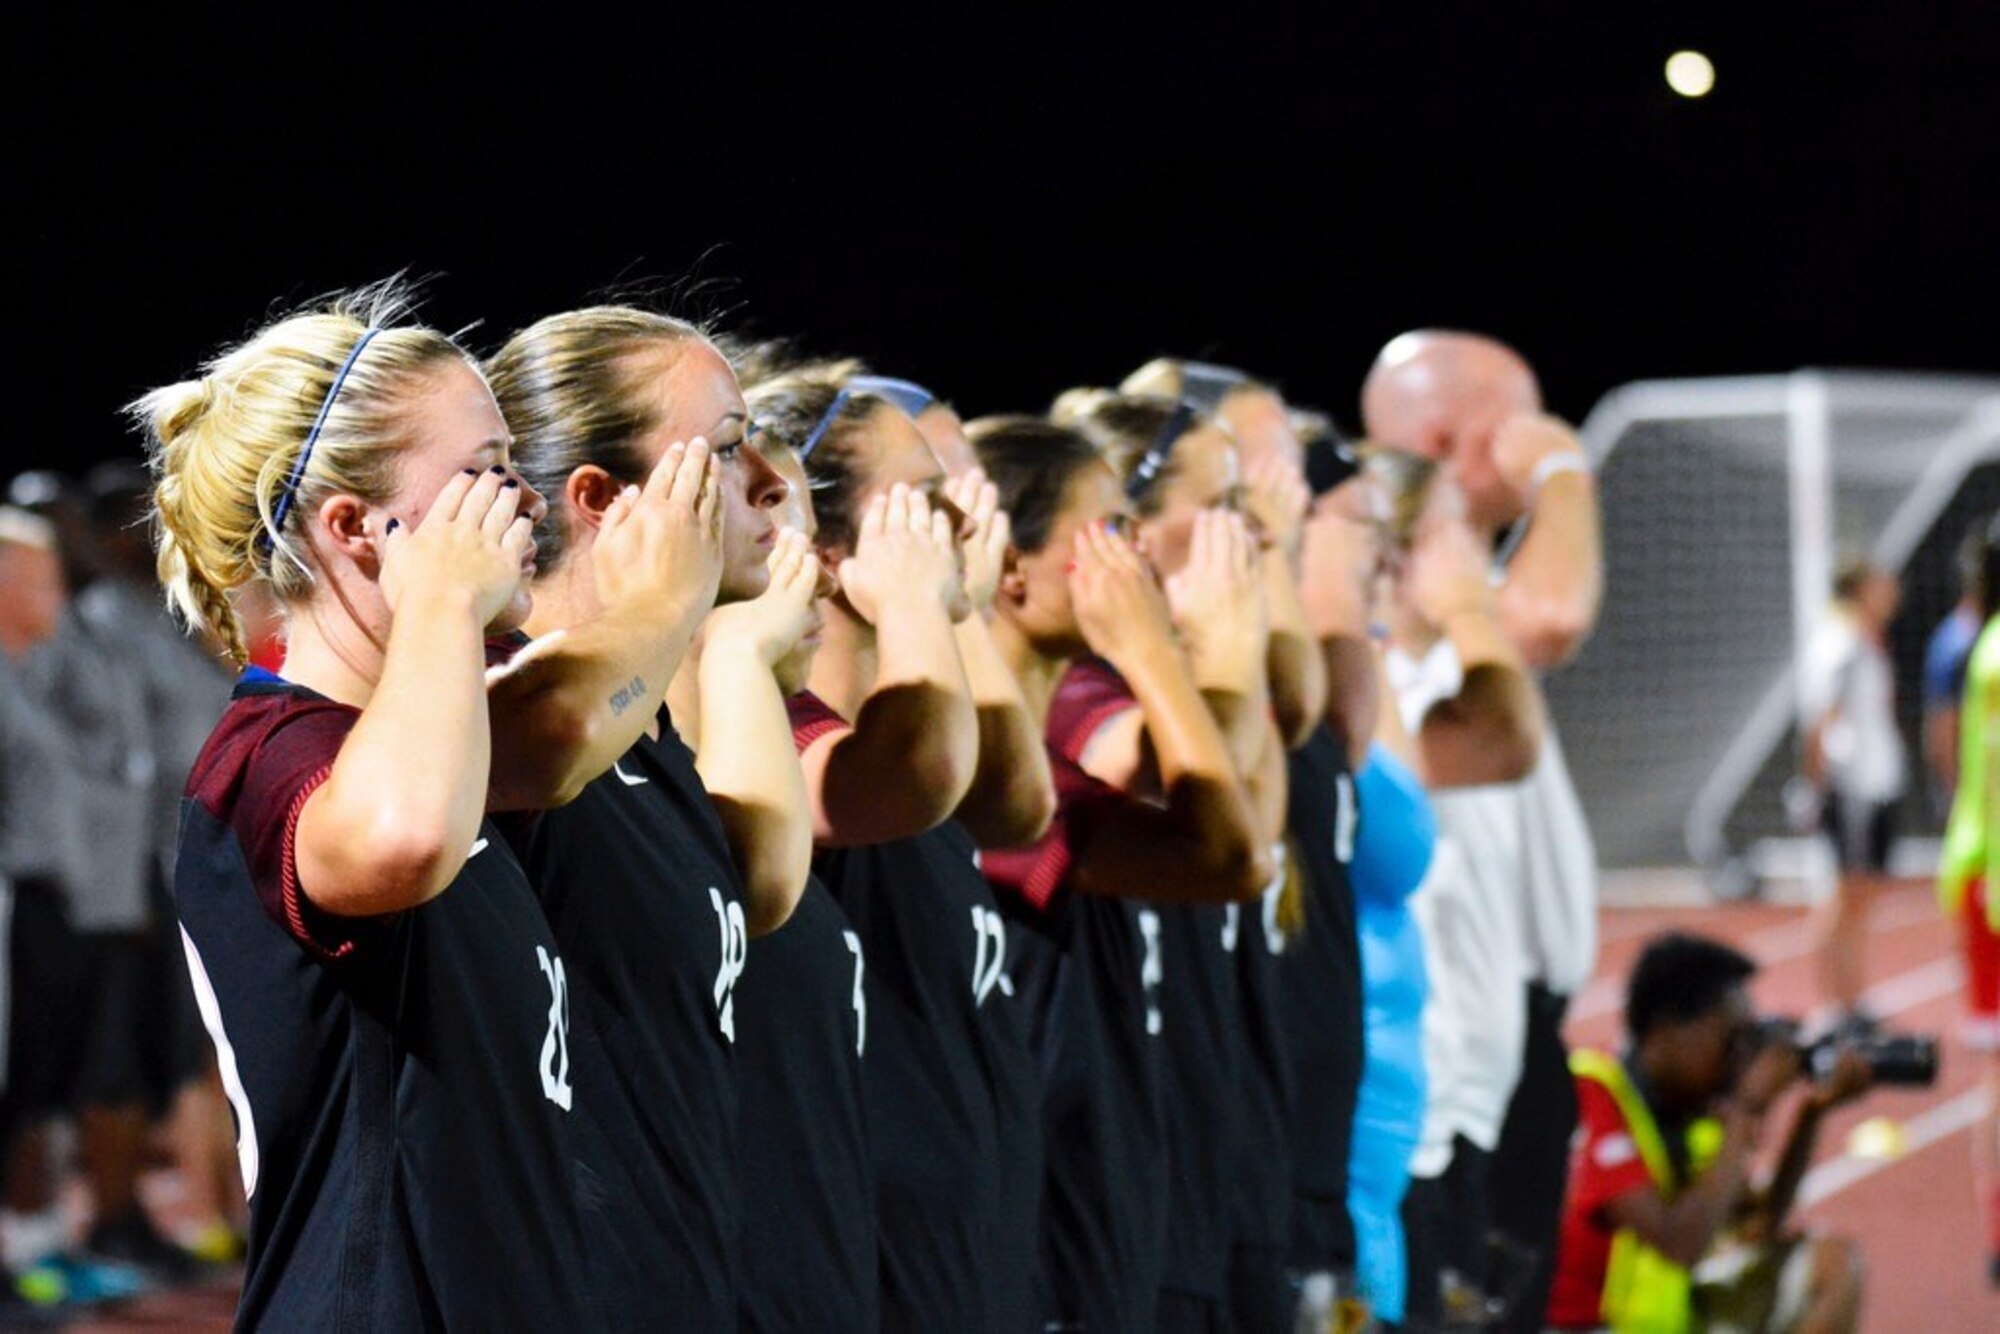 1st Lt. Carla Cimo, forward, U.S. Women’s National Armed Forces Soccer team and teammates salute the United States Flag during the playing of the U.S. National Anthem before a game. Anthems for both countries are played as part of pre-game ceremonies. (Courtesy photo)